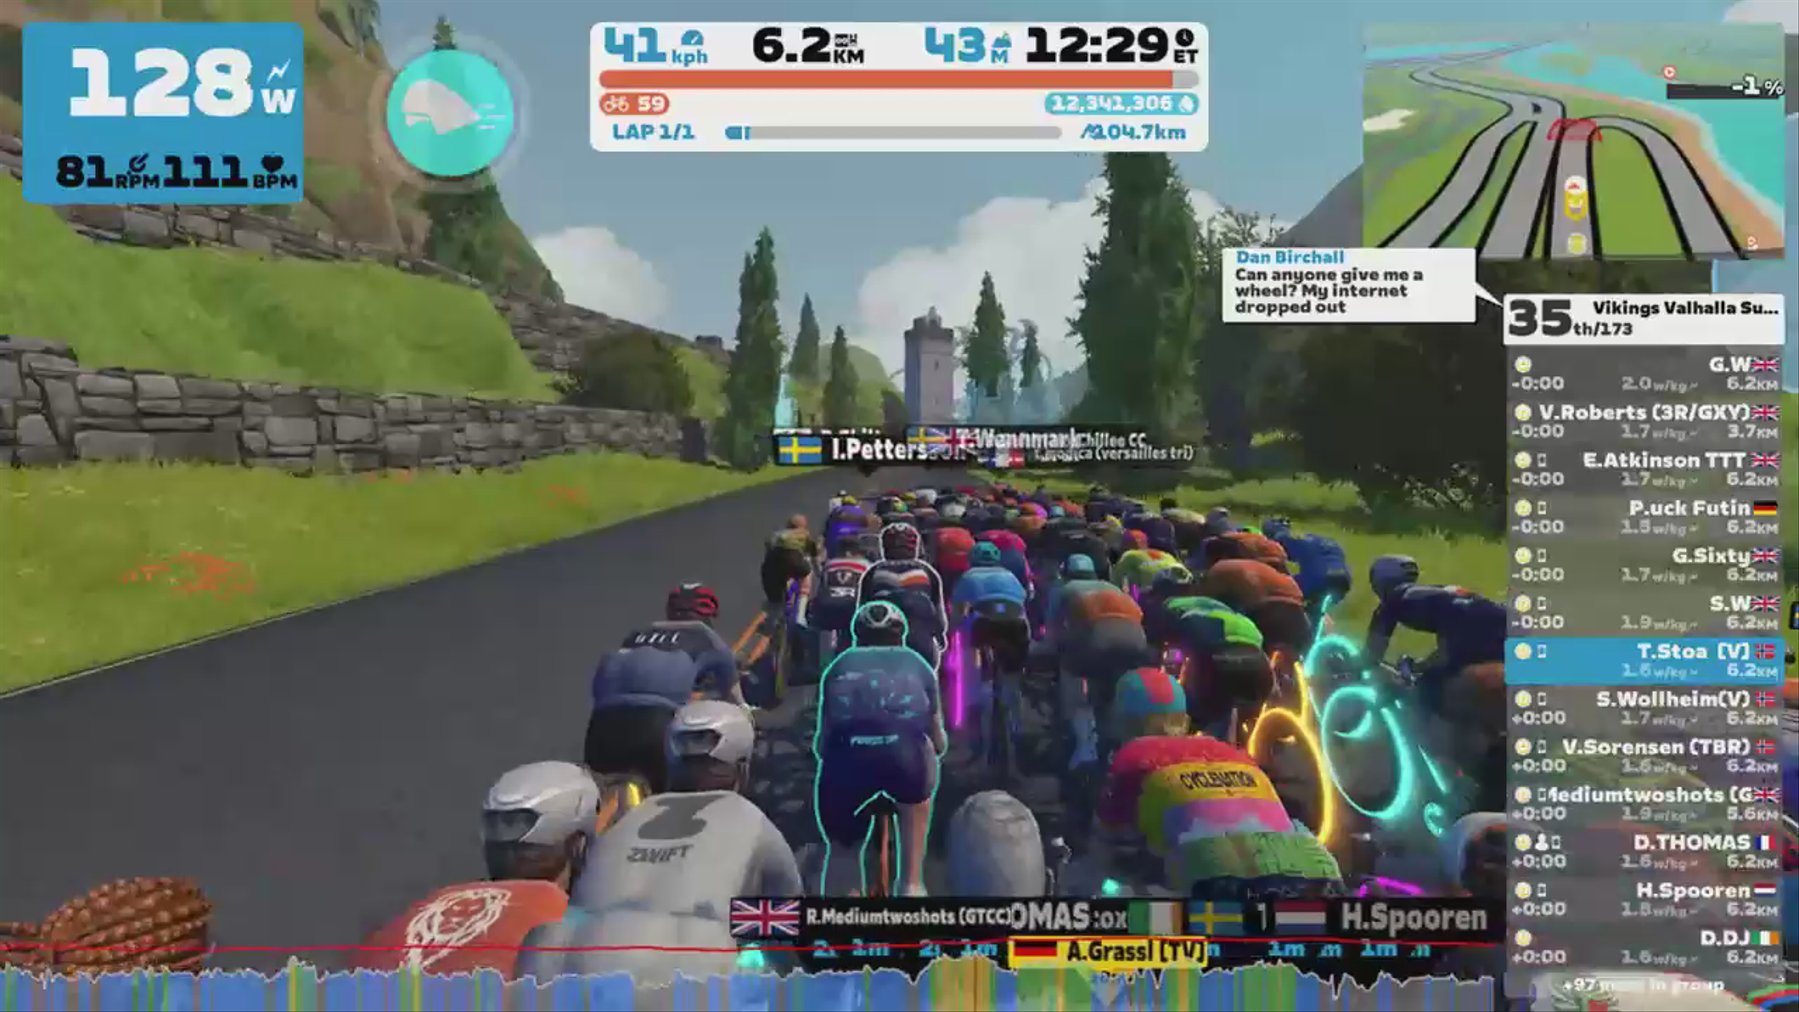 Zwift - Group Ride: Vikings Valhalla Sunday Skaal ride (D) on The Mega Pretzel in Watopia